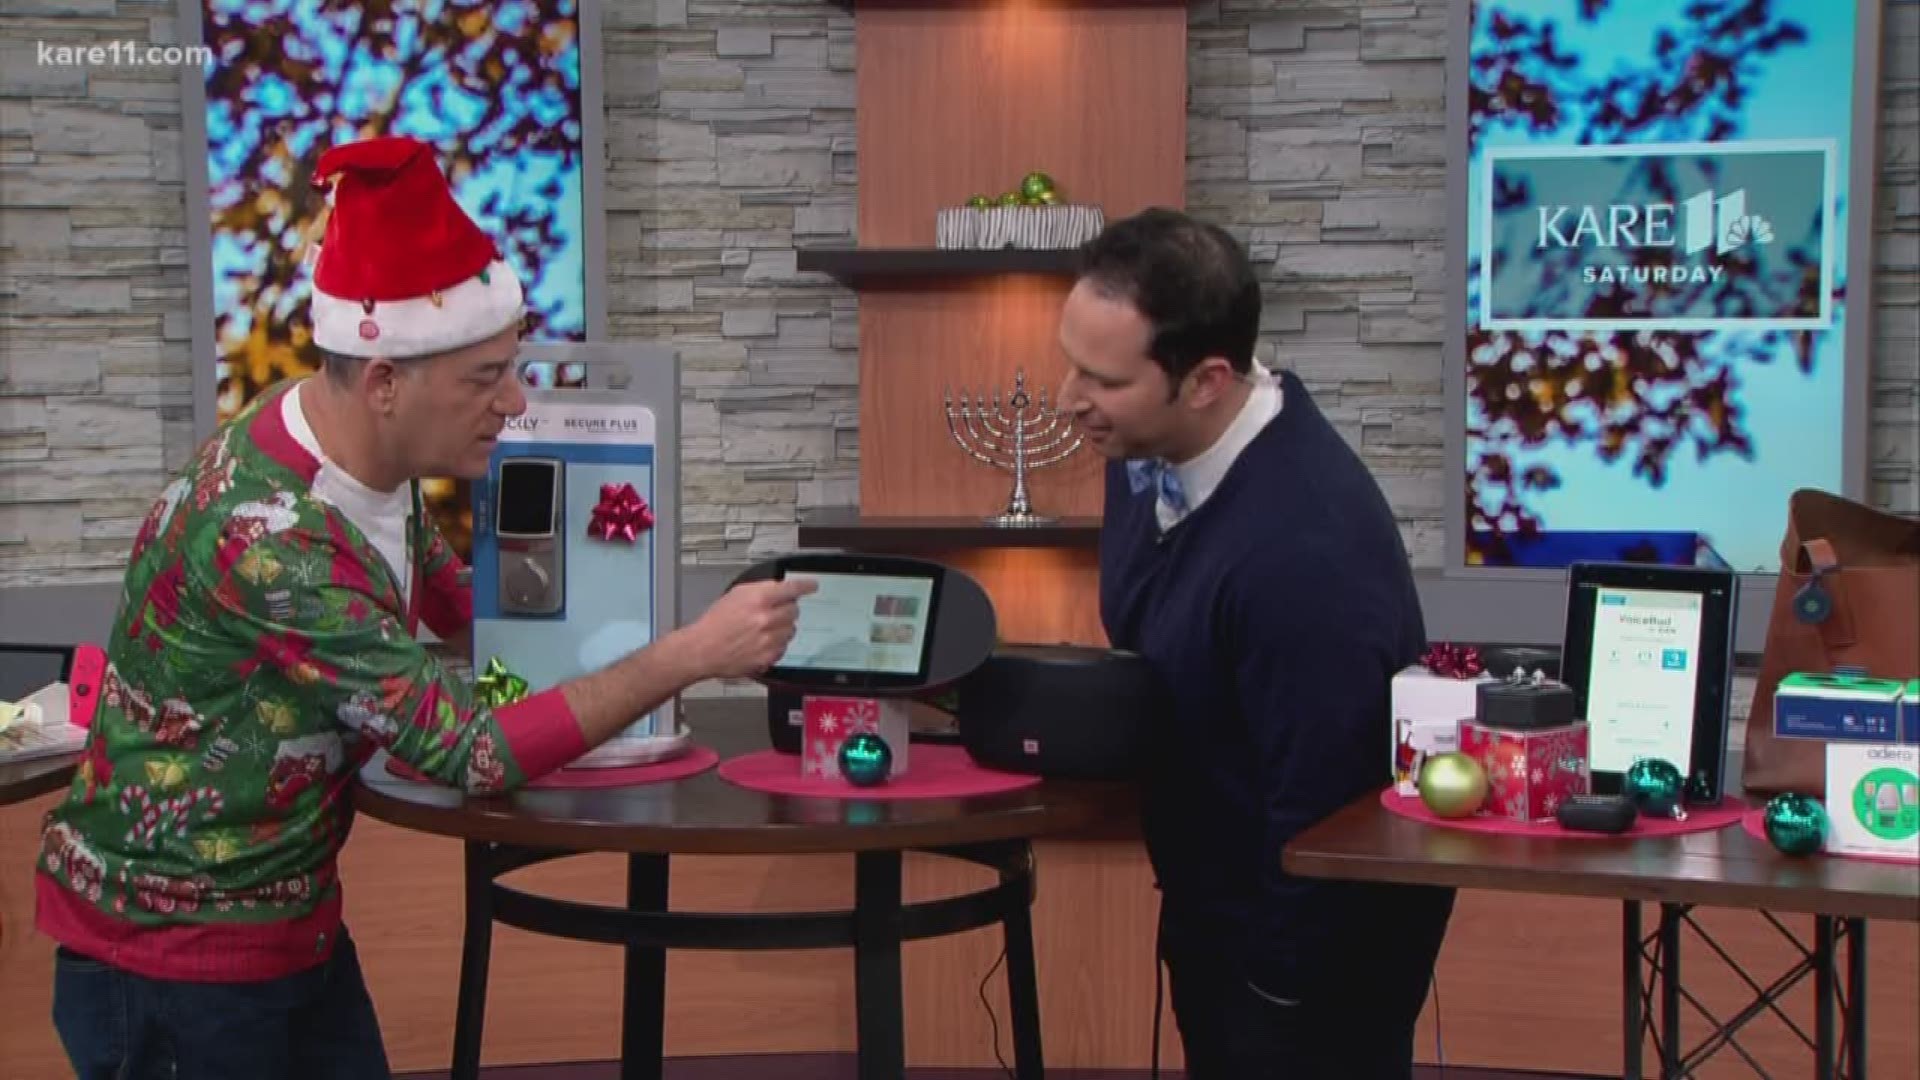 Gadget Nation author Steve Greenberg shows off some of this holiday's top tech gadgets. 
https://www.kare11.com/article/news/local/kare11-saturday/tech-the-halls-with-gadget-nation-author-steve-greenberg/89-618872497